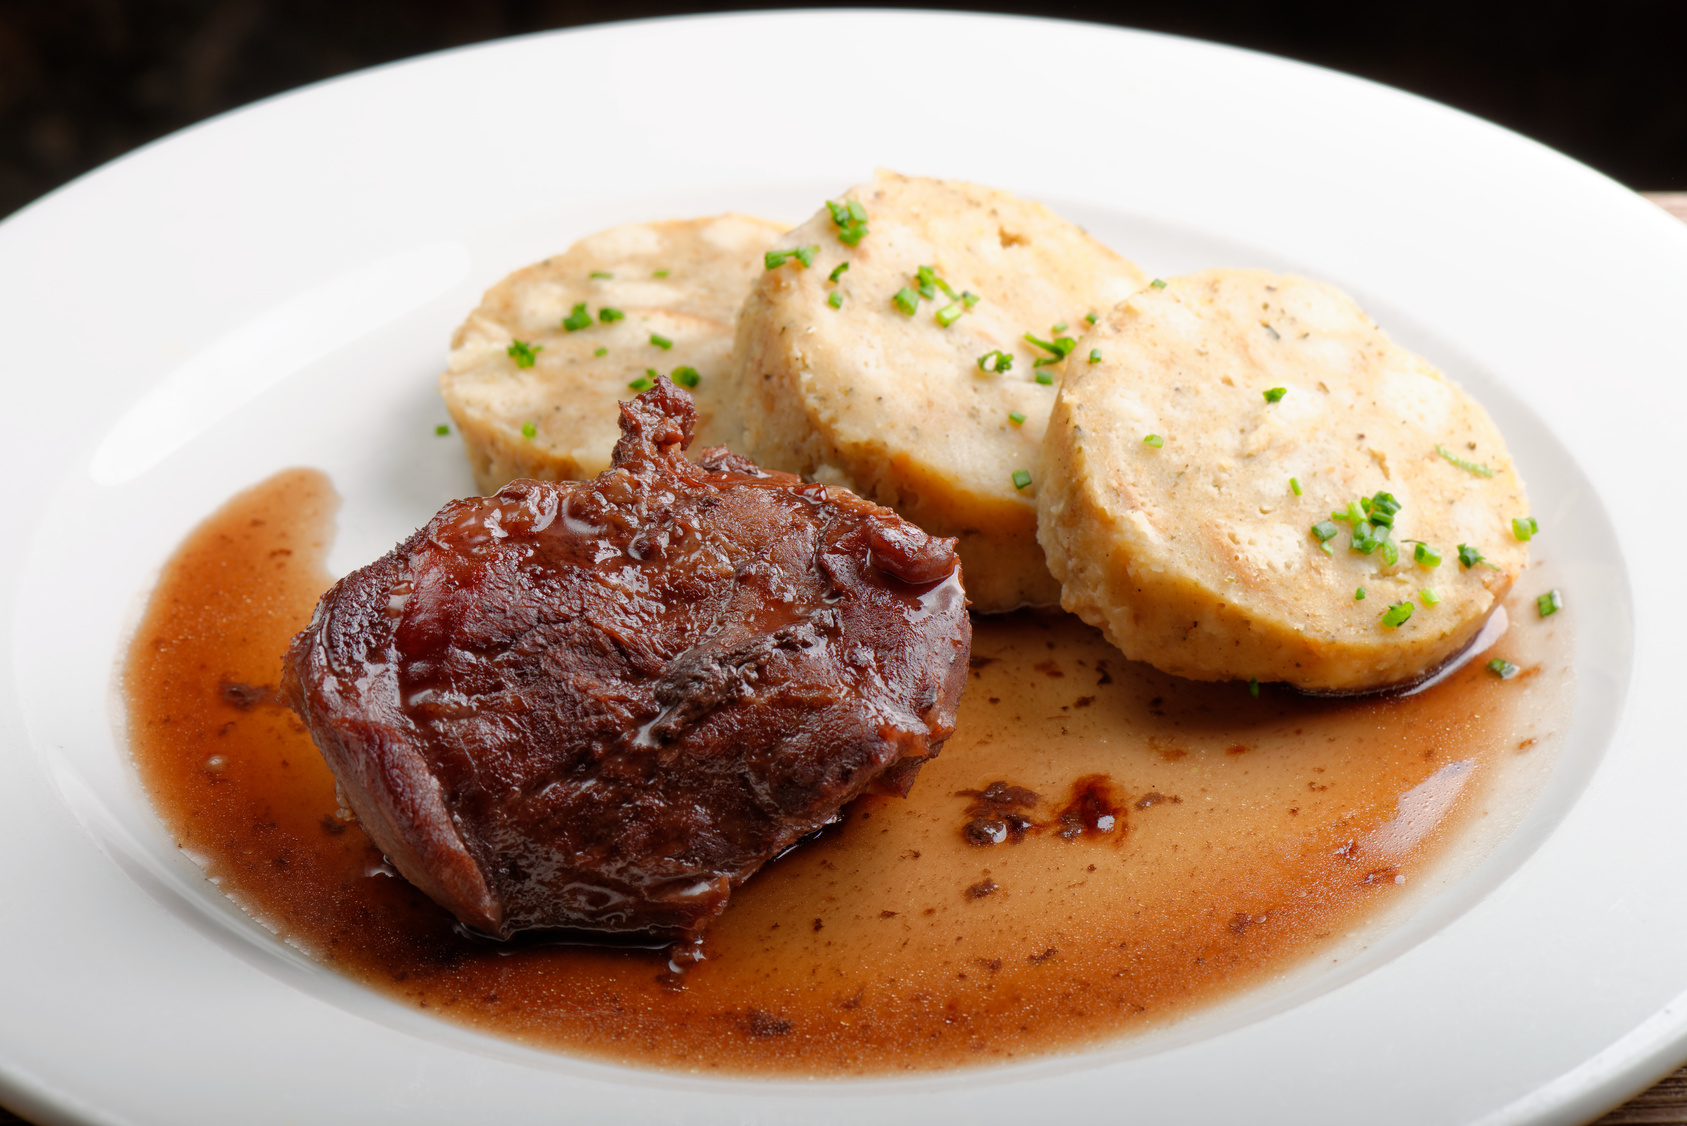 Veal fillet with rich sauce and dumplings - traditional Czech dish